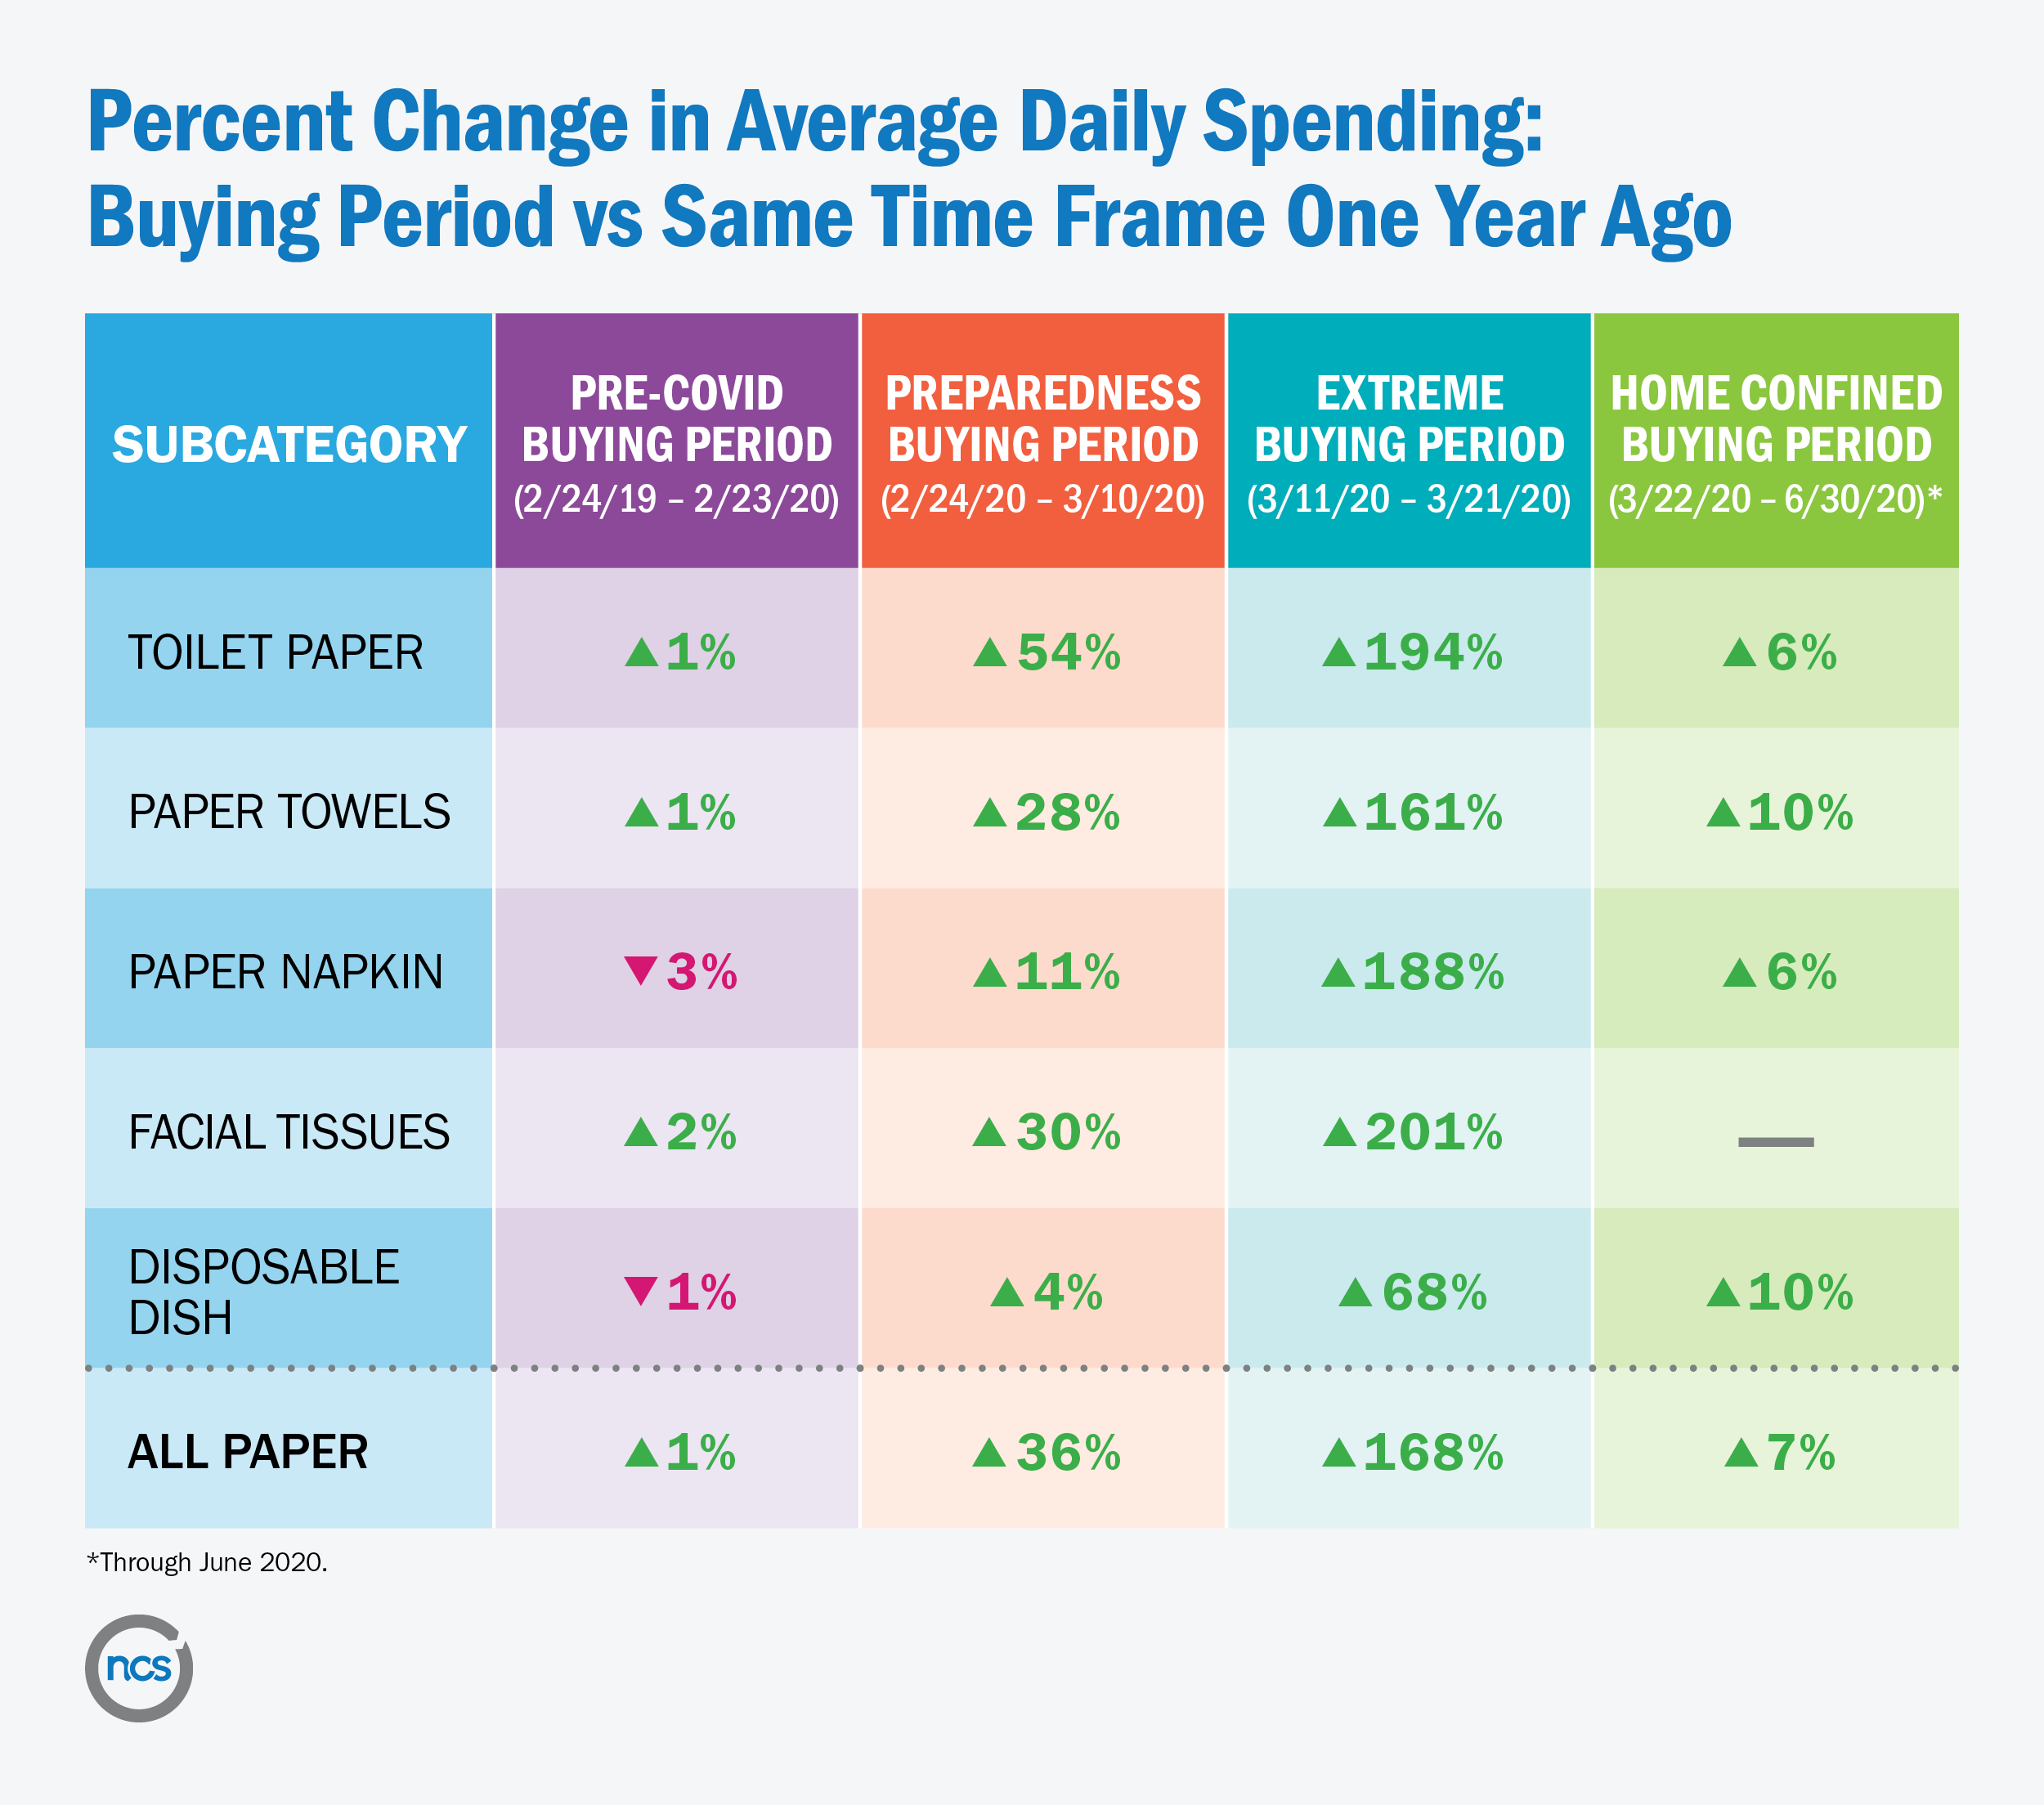 Percent change in average daily spending: buying period vs. same time frame one year ago of subcategories of all paper goods.